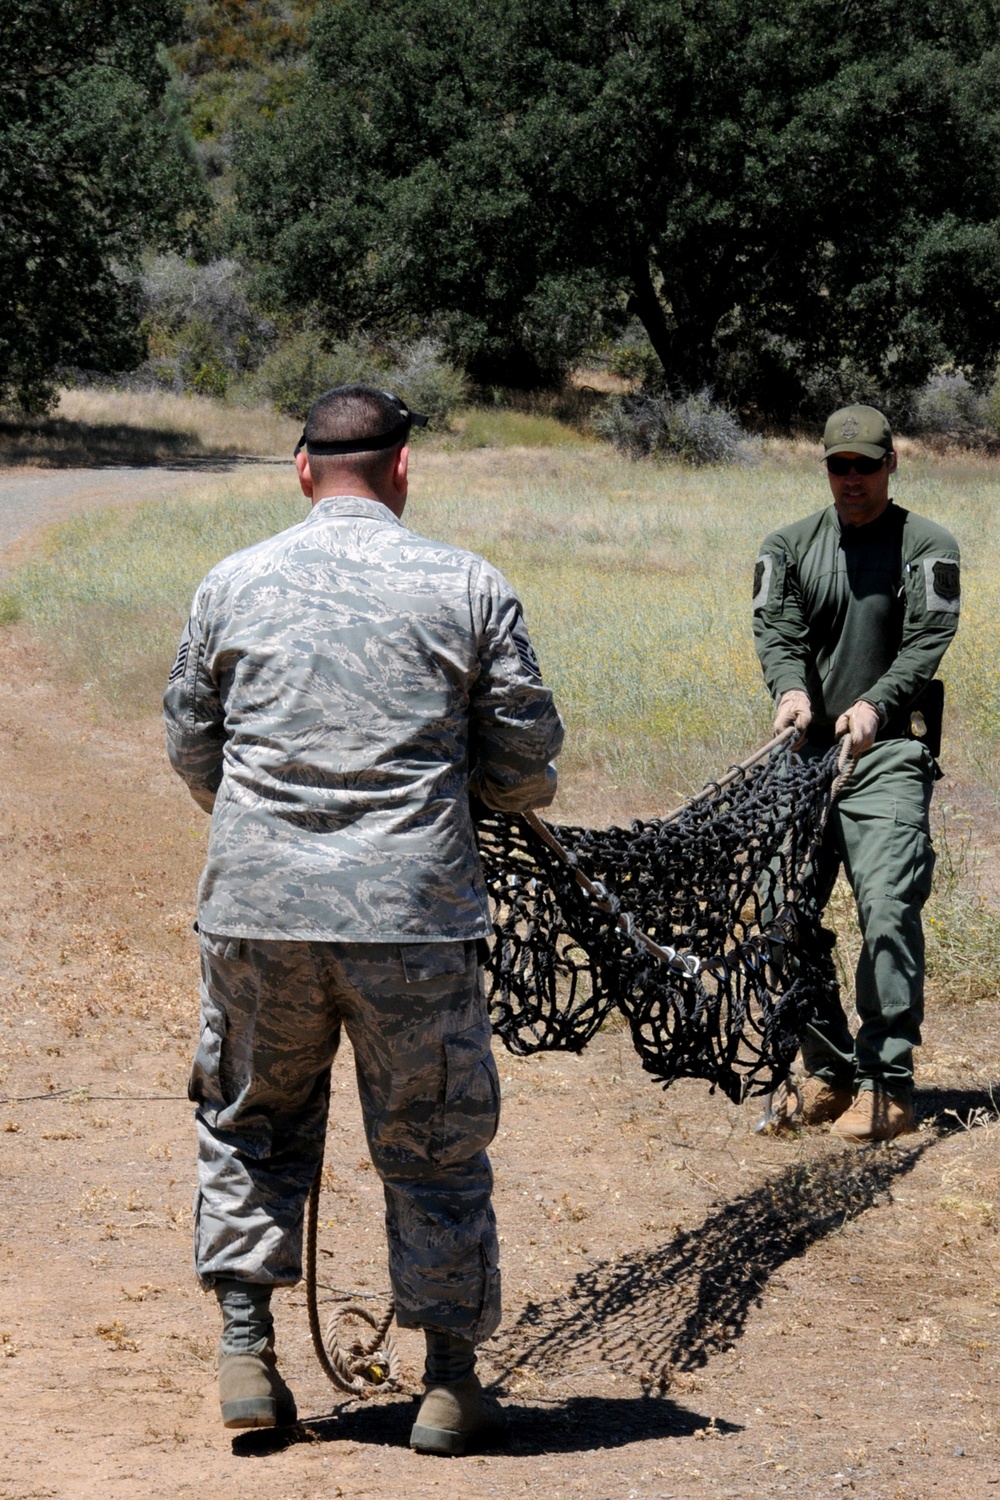 California Operation Full Court Press targeted Mendocino National Forest